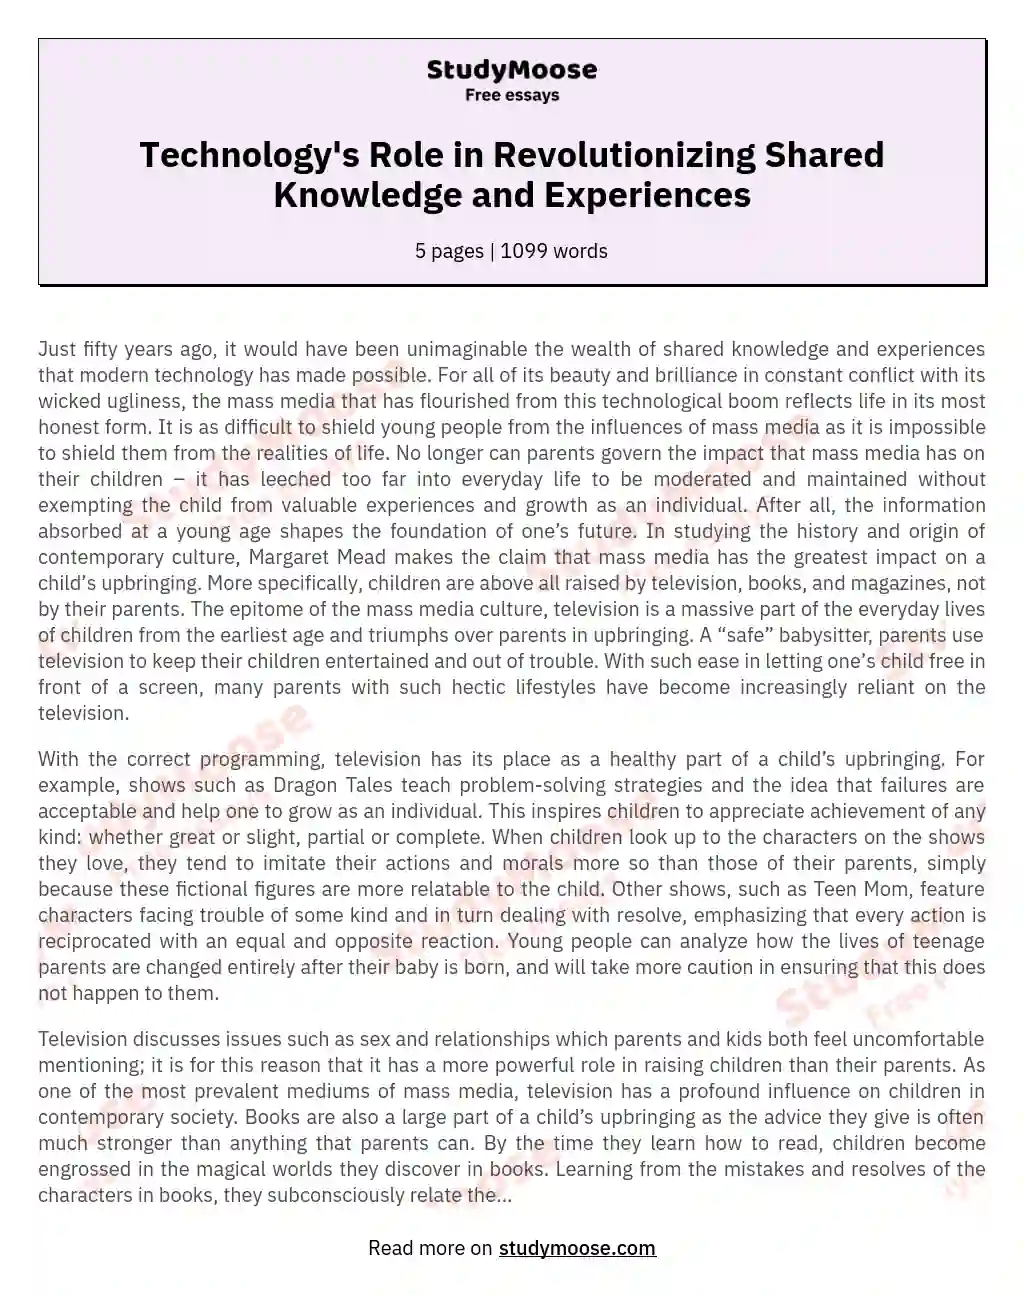 Technology's Role in Revolutionizing Shared Knowledge and Experiences essay